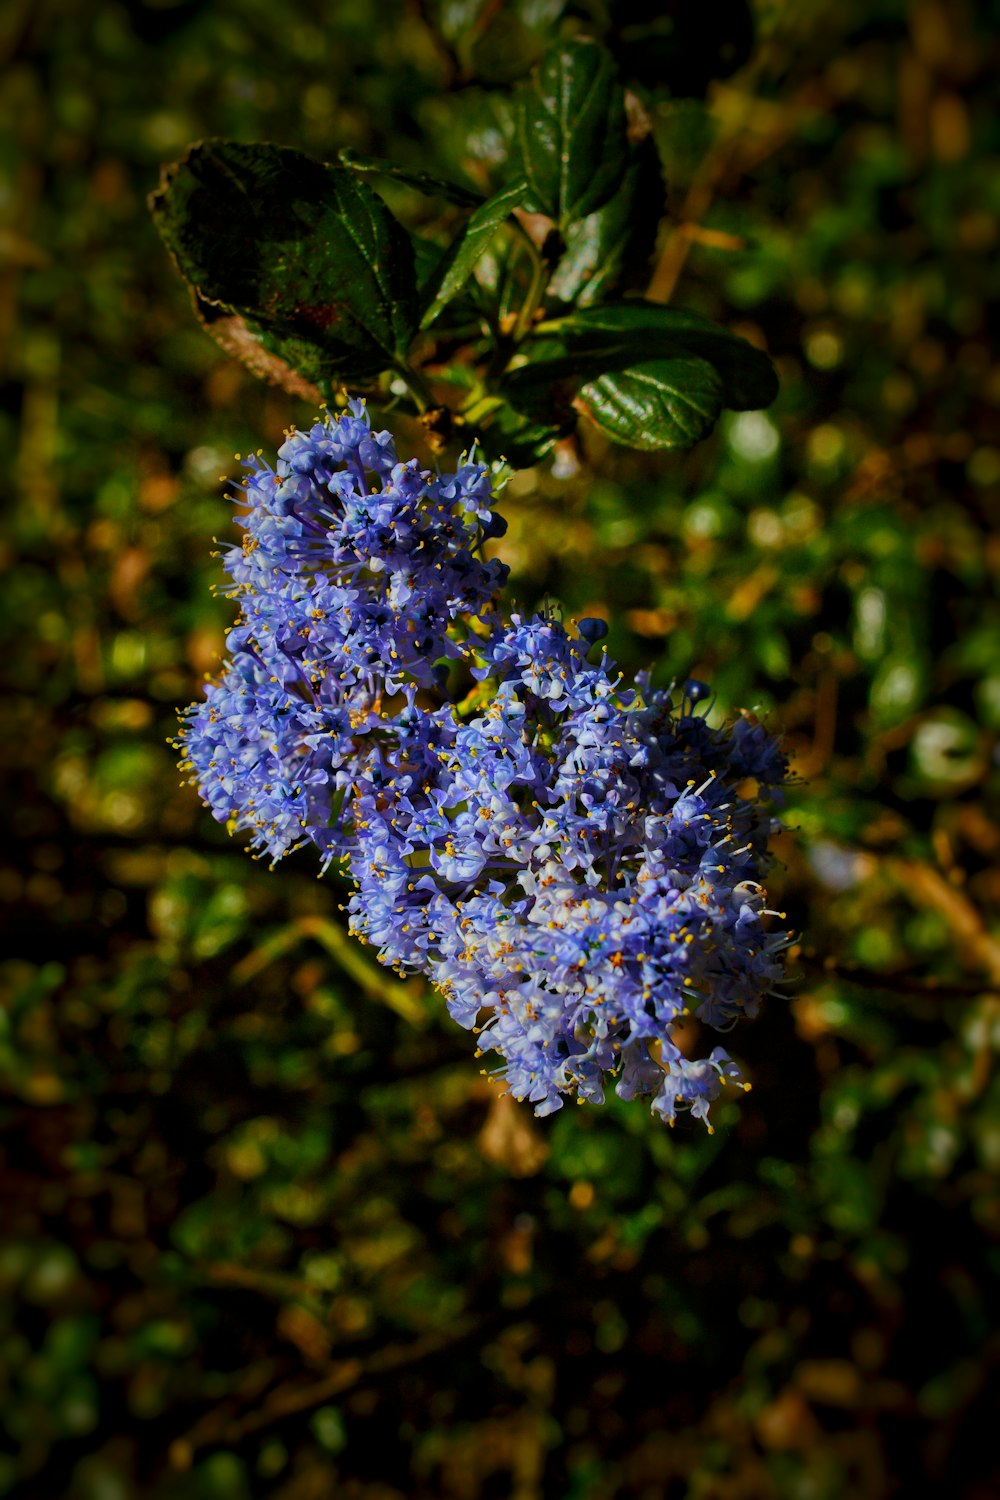 a close up of a blue flower on a plant